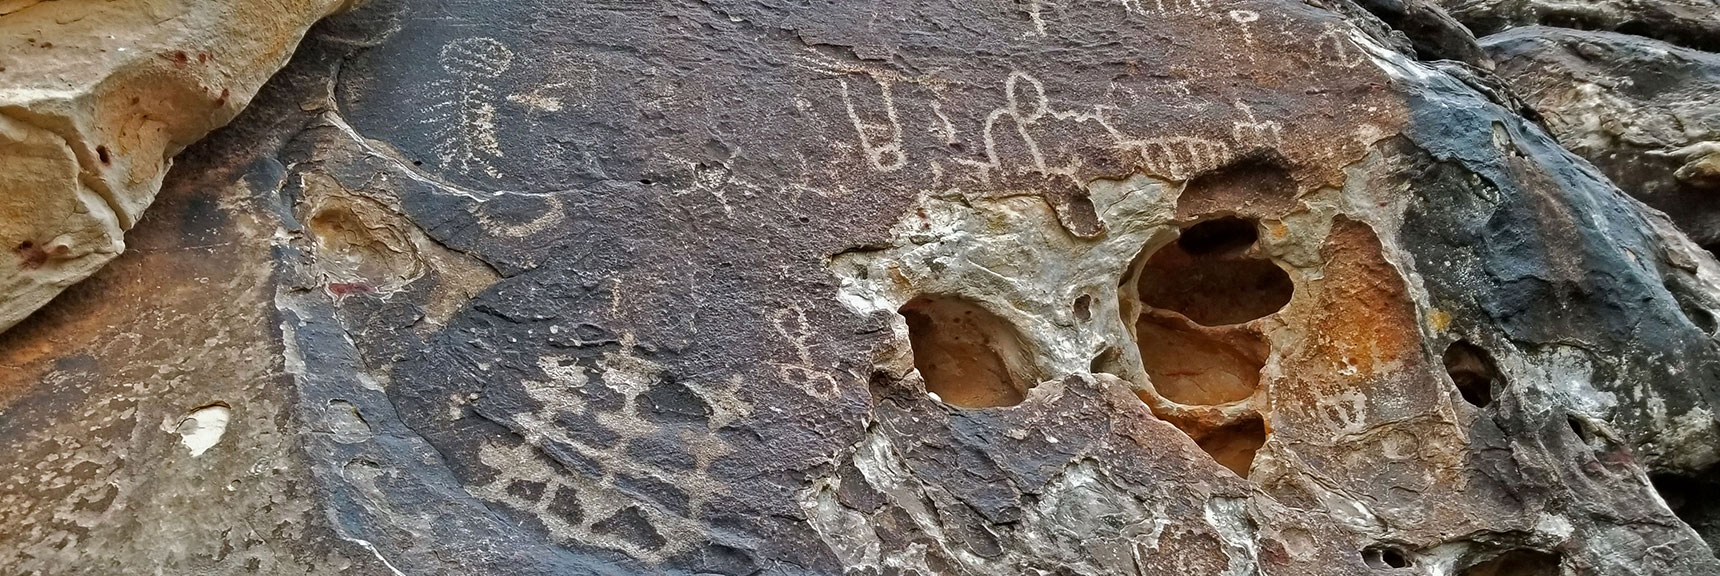 The Meaning of These Petroglyphs Remains a Mystery | Willow Spring Loop, Petroglyph Canyon, Lost Creek Canyon | Red Rock Canyon National Conservation Area, Nevada